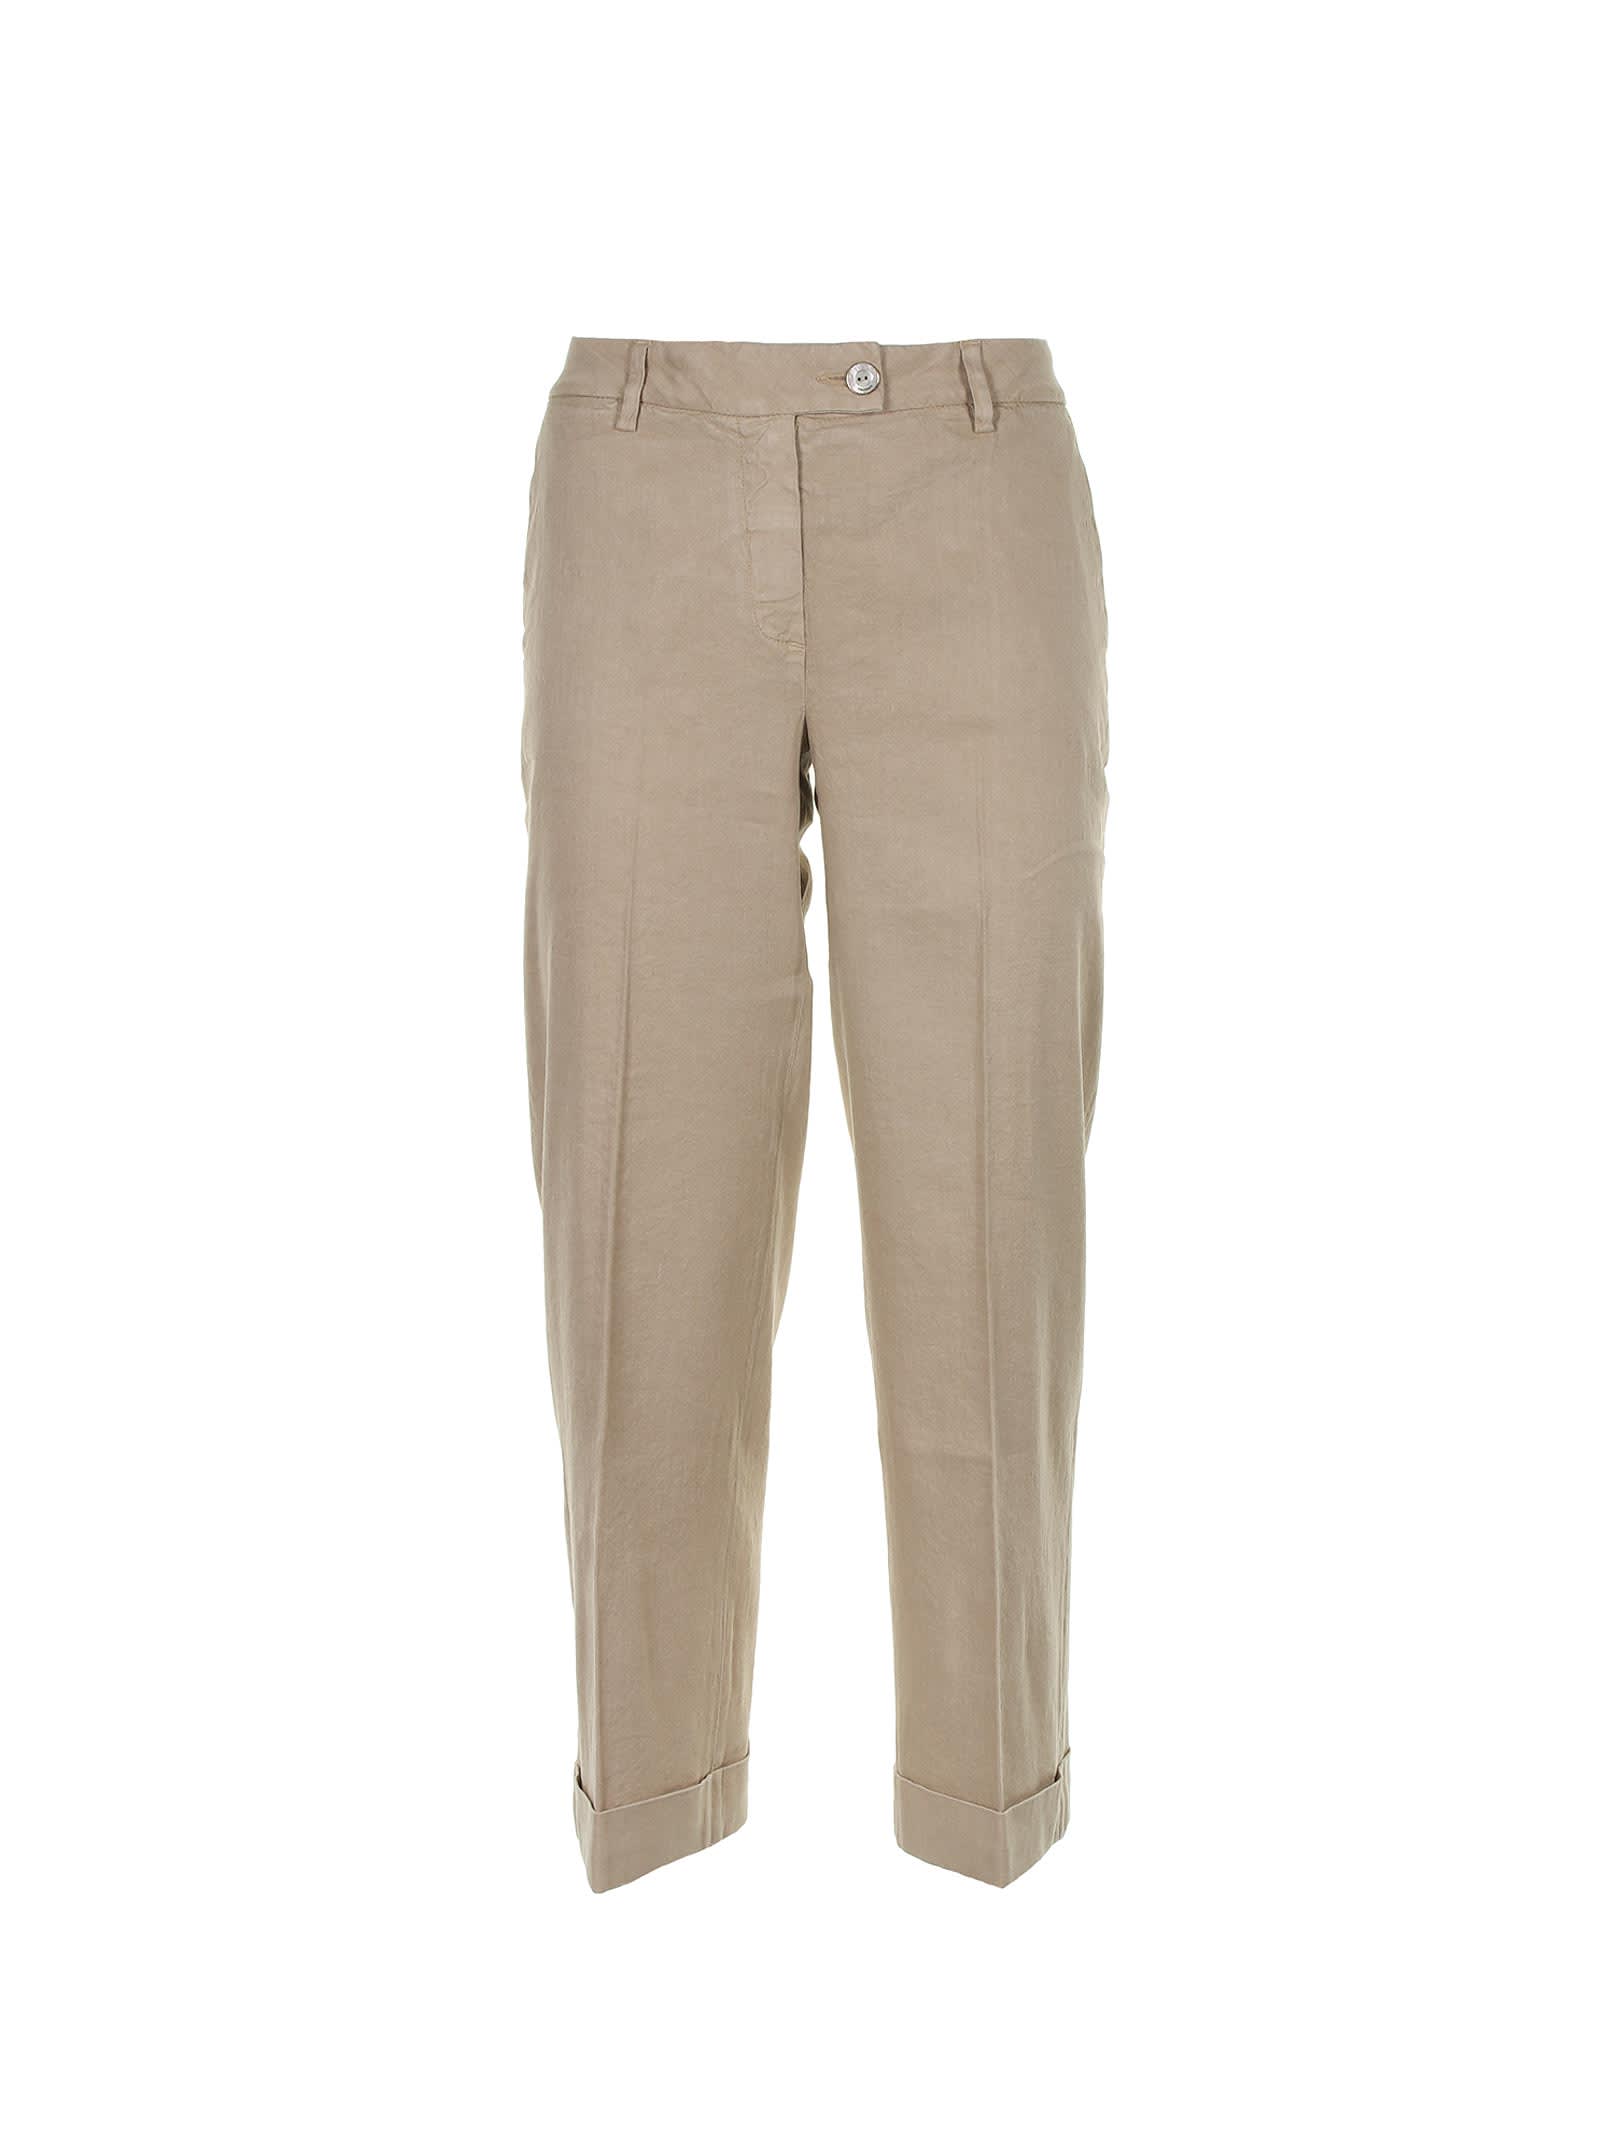 Re-HasH Re-hash Cotton Trousers